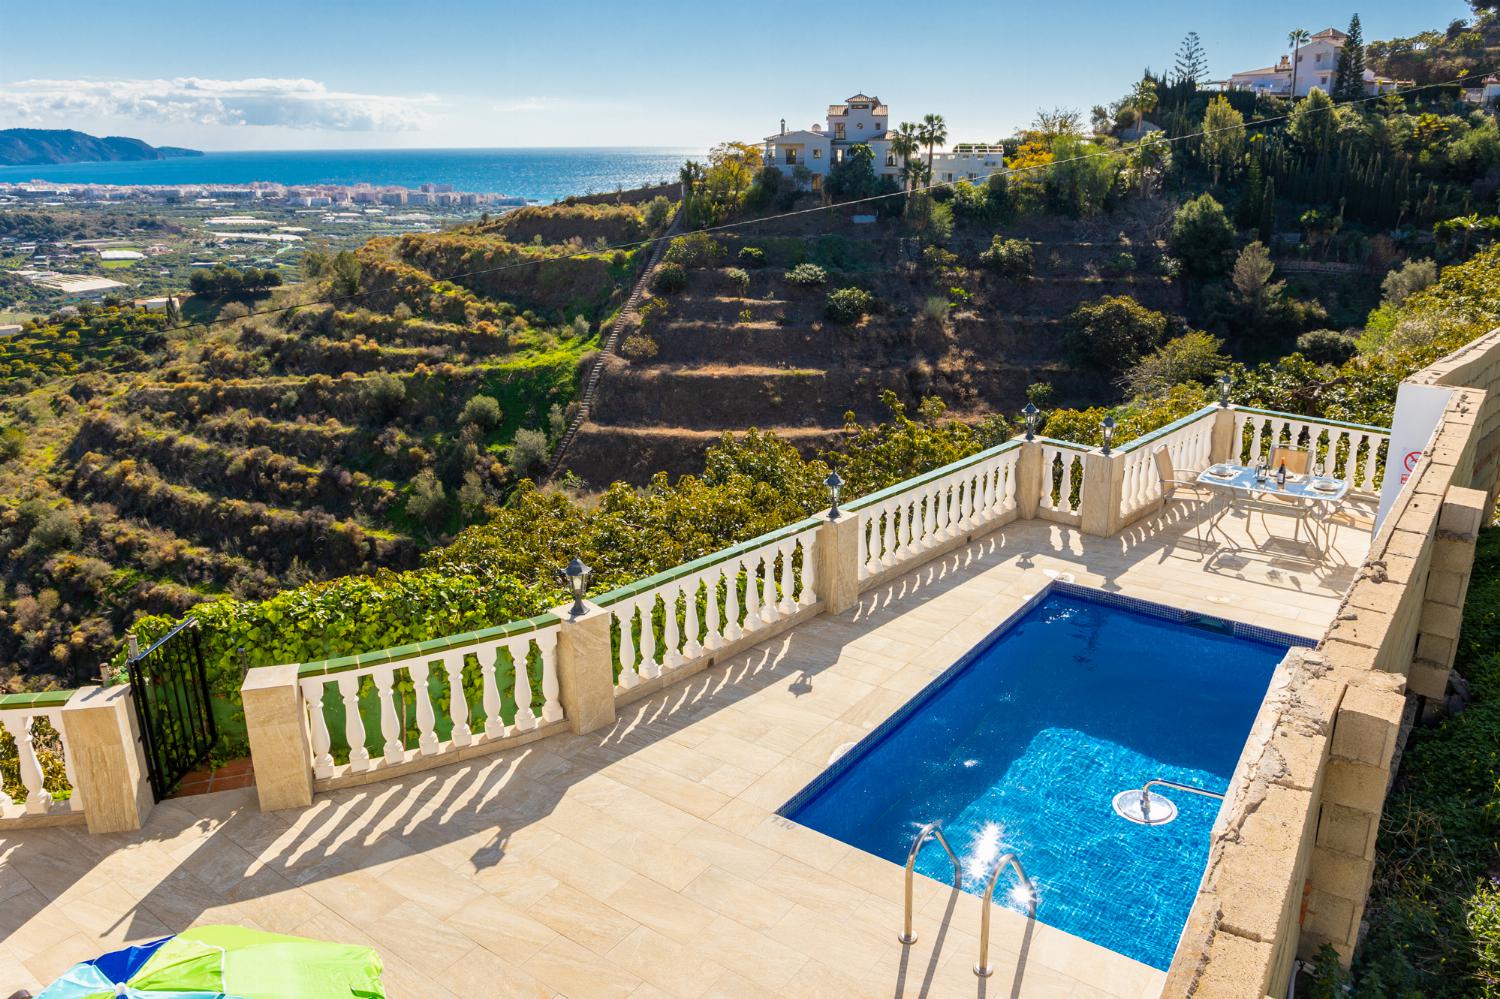 Private pool and terrace with panoramic views of sea and mountains